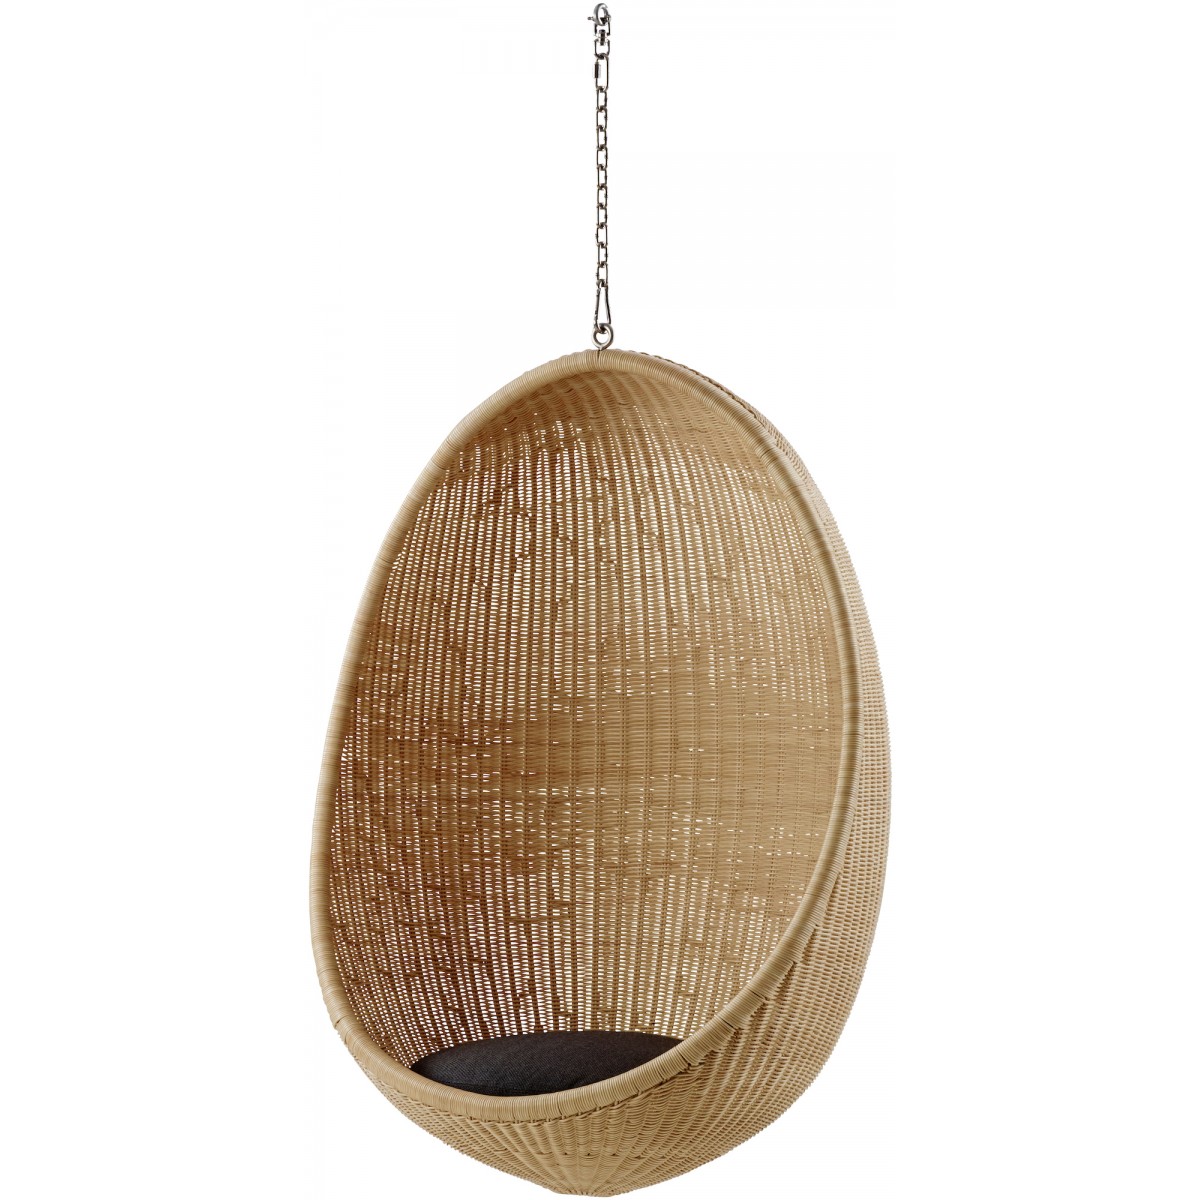 cushion for hanging Egg chair - indoor version